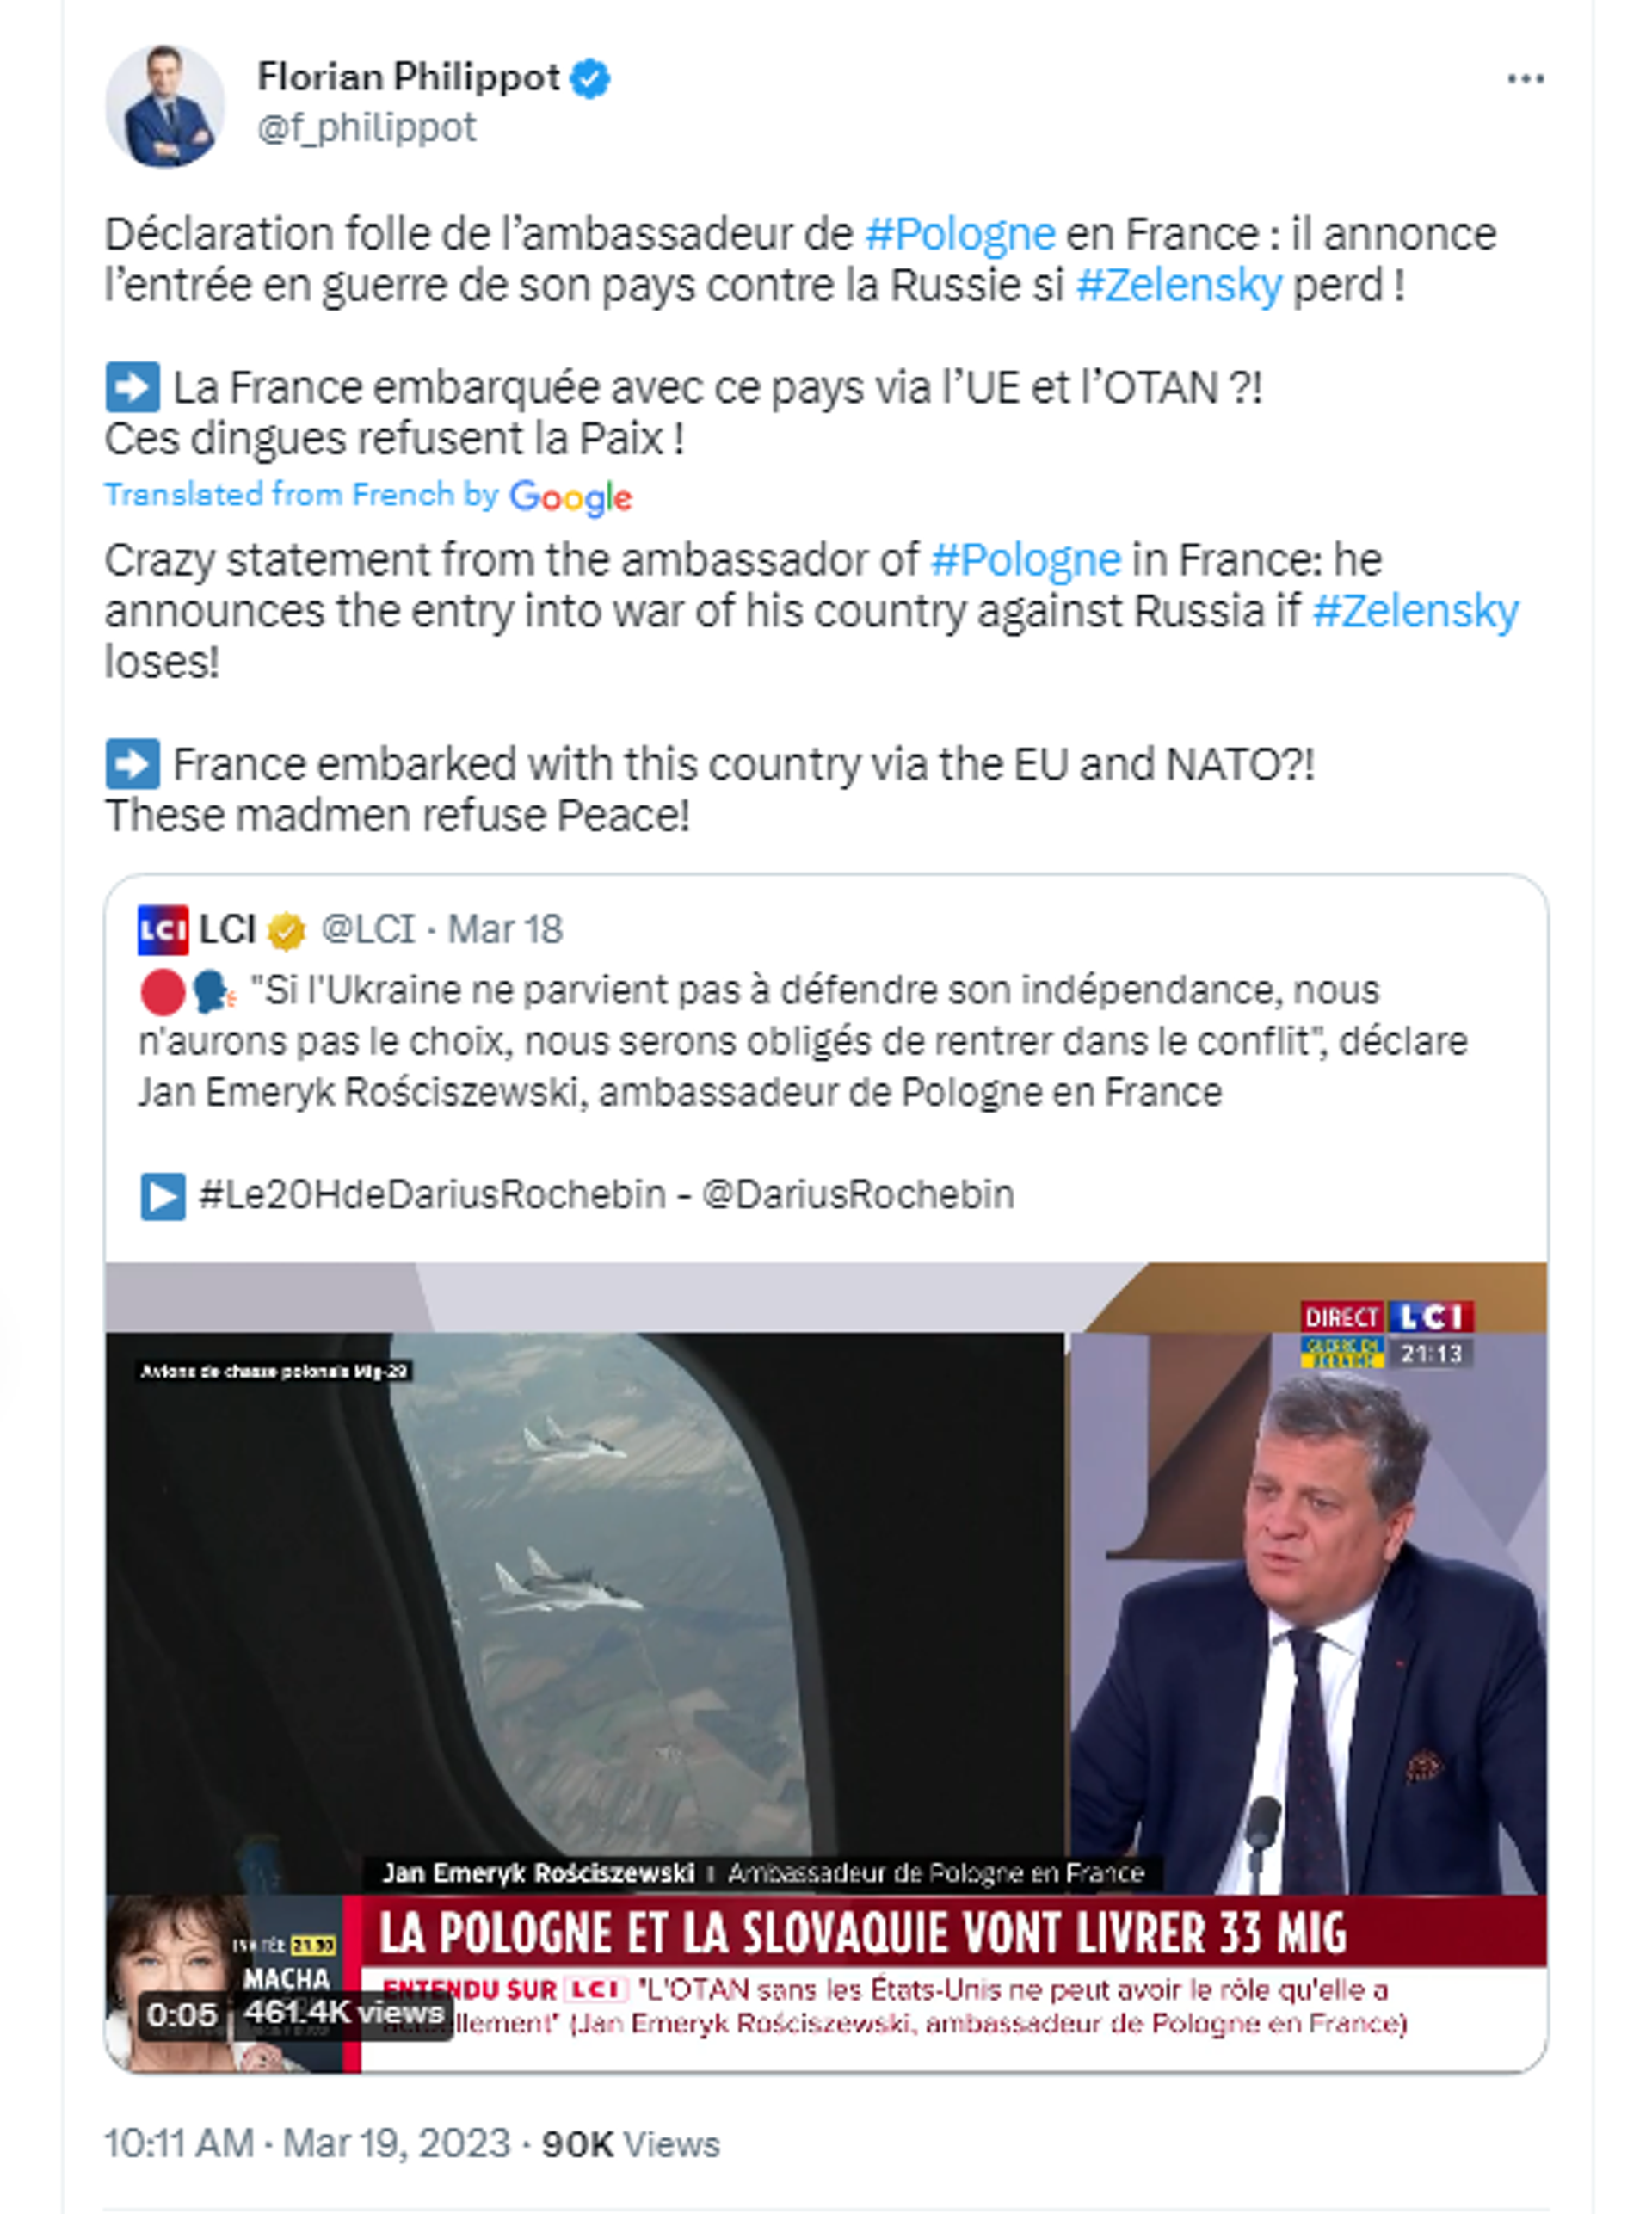 Screenshot of Twitter post by leader of France's Eurosceptic party The Patriots, Florian Philippot. - Sputnik International, 1920, 20.03.2023